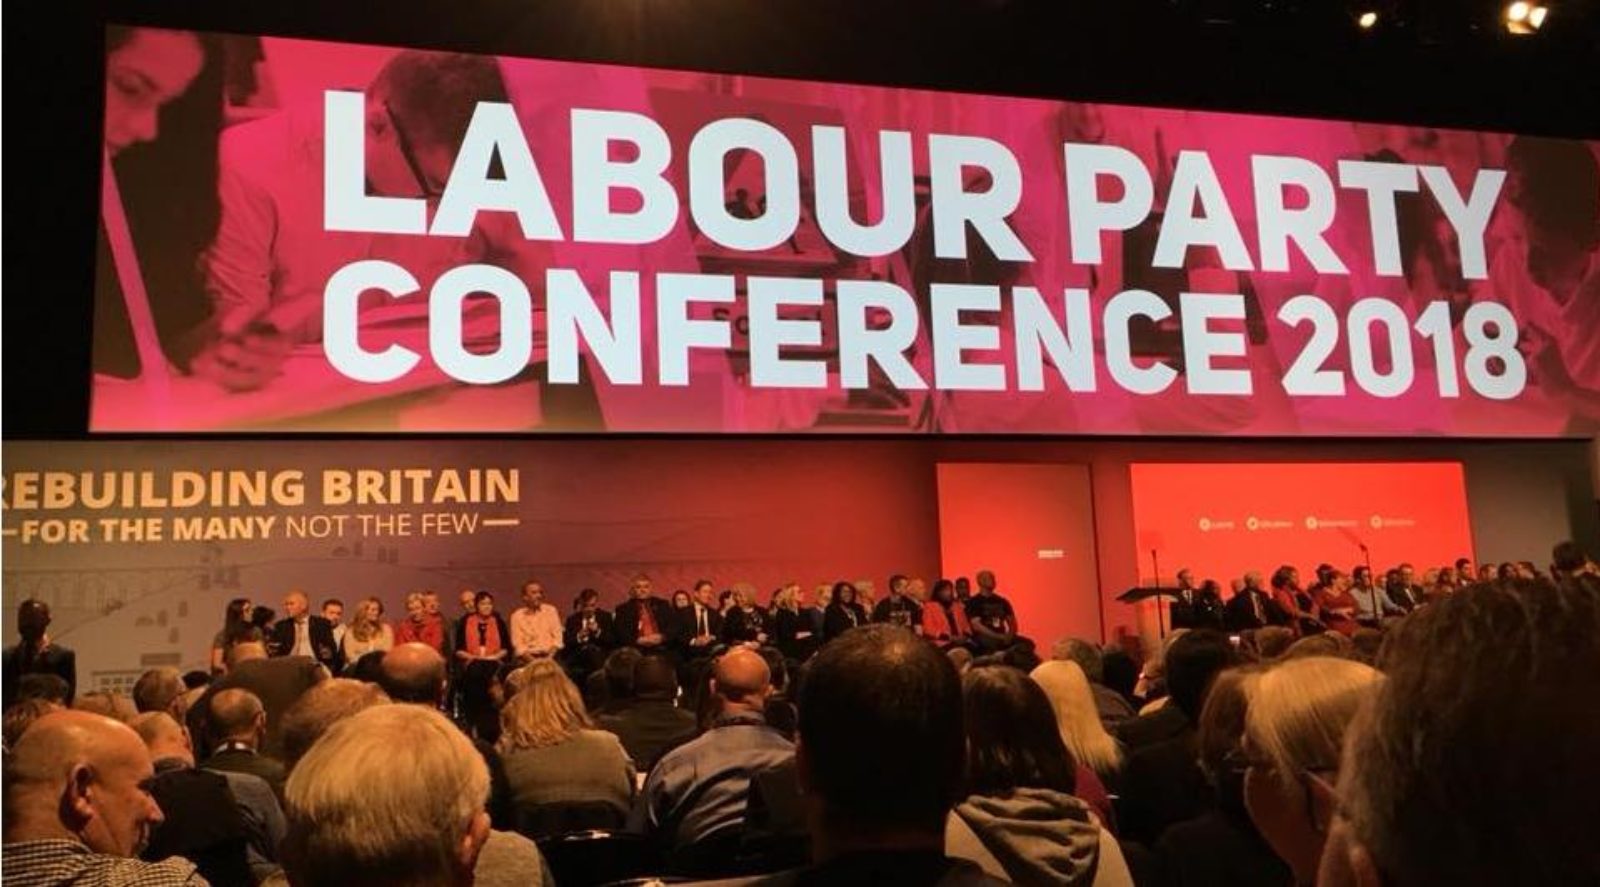 Labour Party Conference 2018